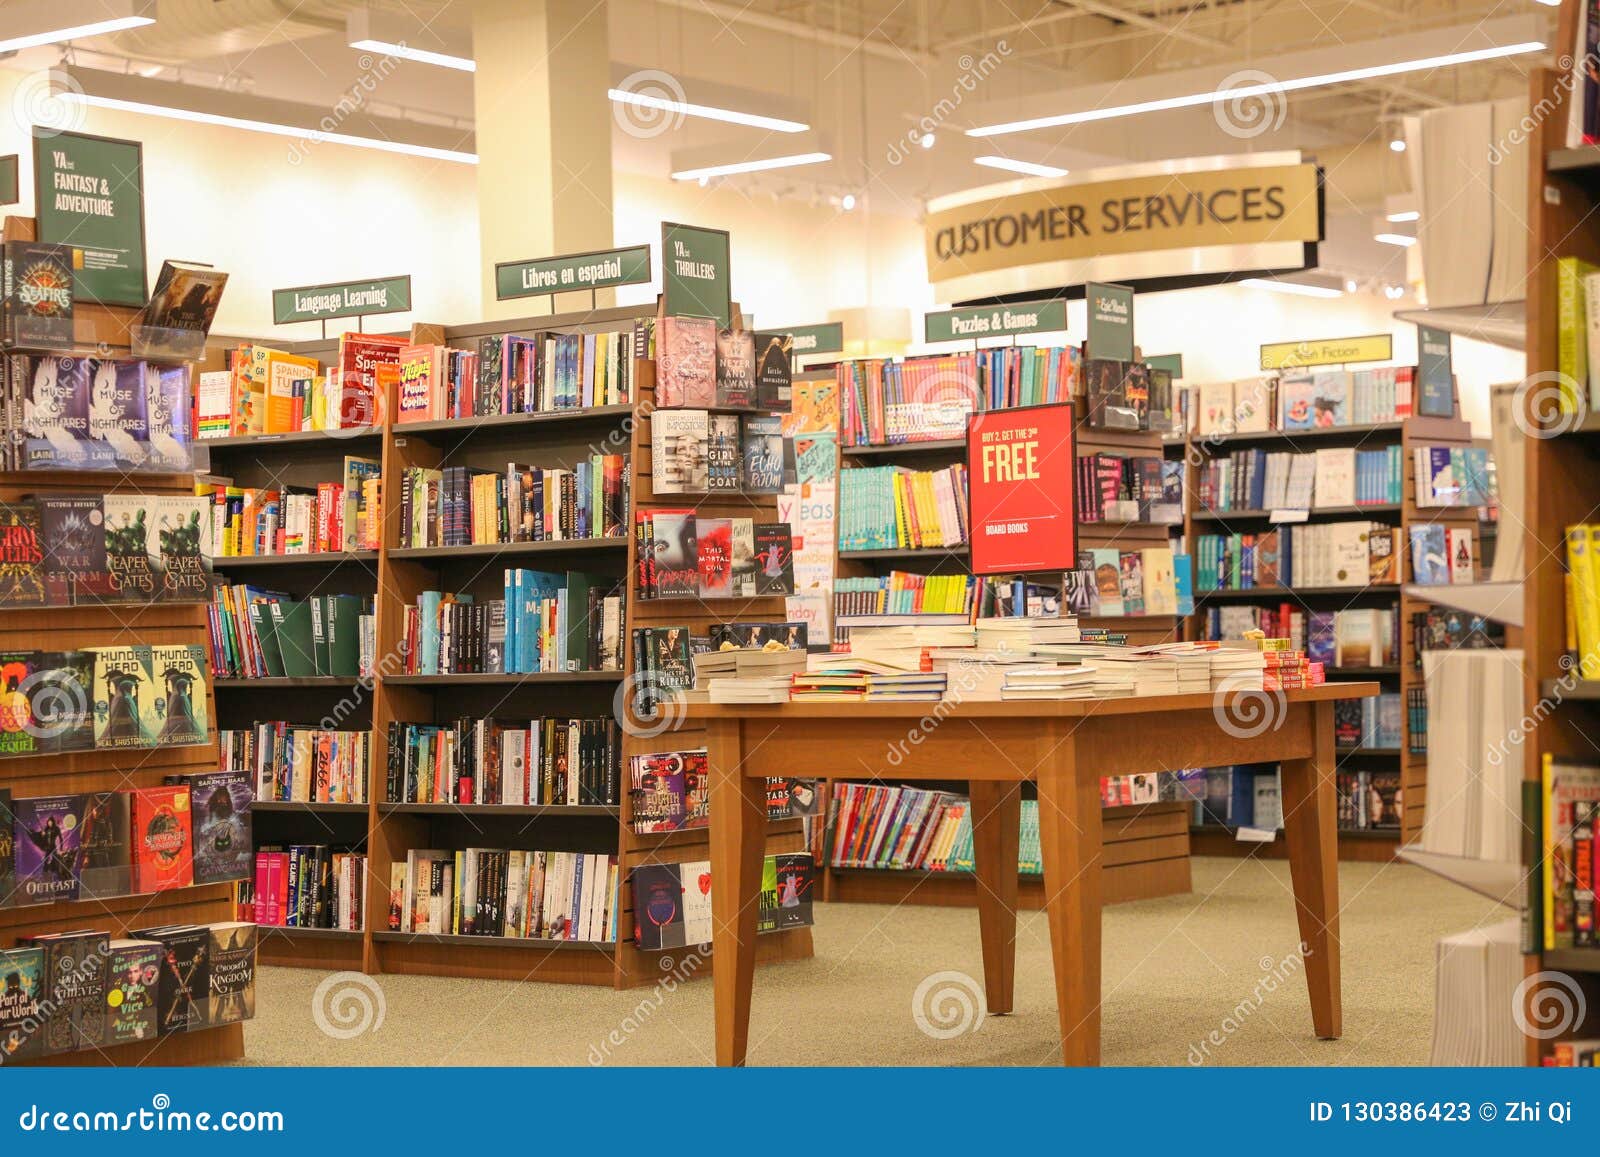 191 Retail Bookseller Photos Free Royalty Free Stock Photos From Dreamstime